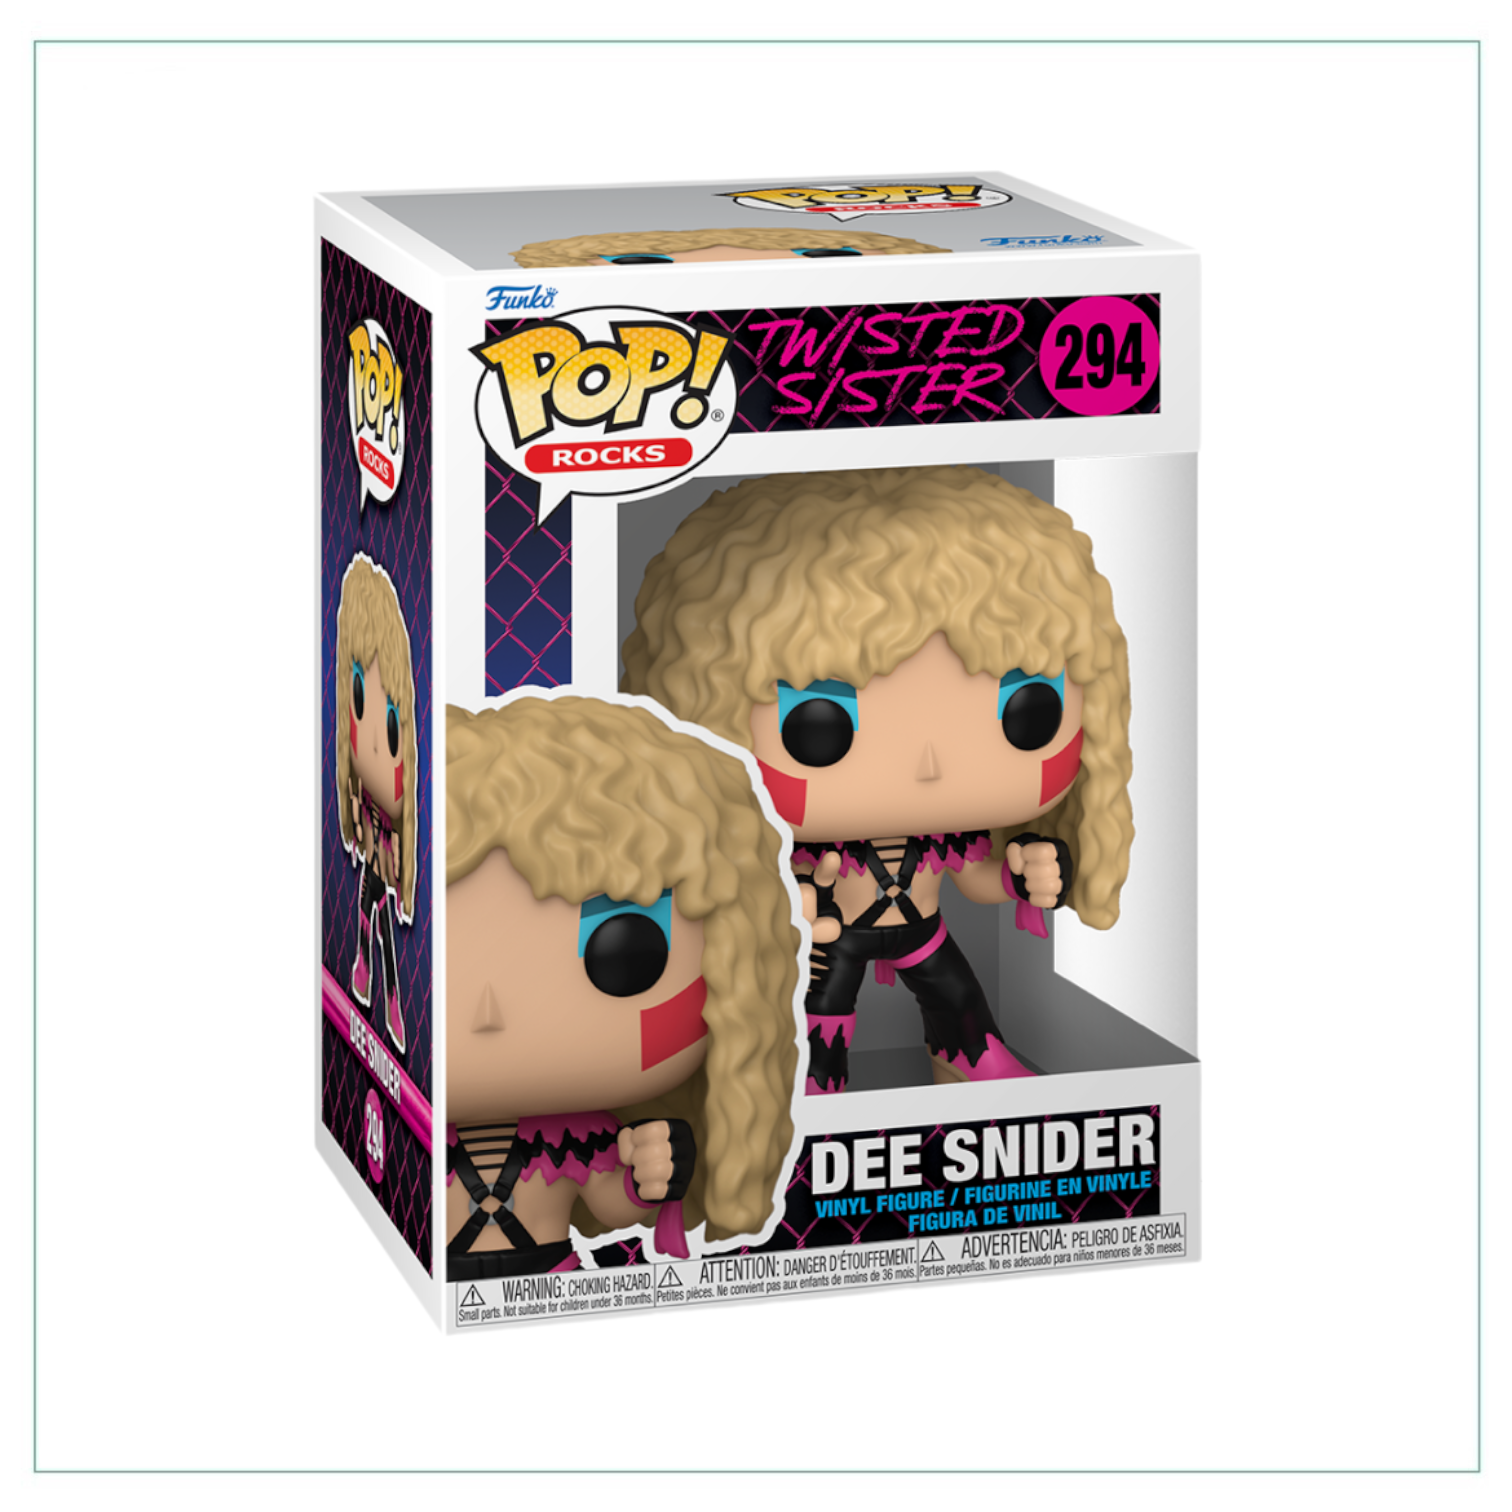 Dee Snider #294 Funko Pop! Twisted Sister - PREORDER